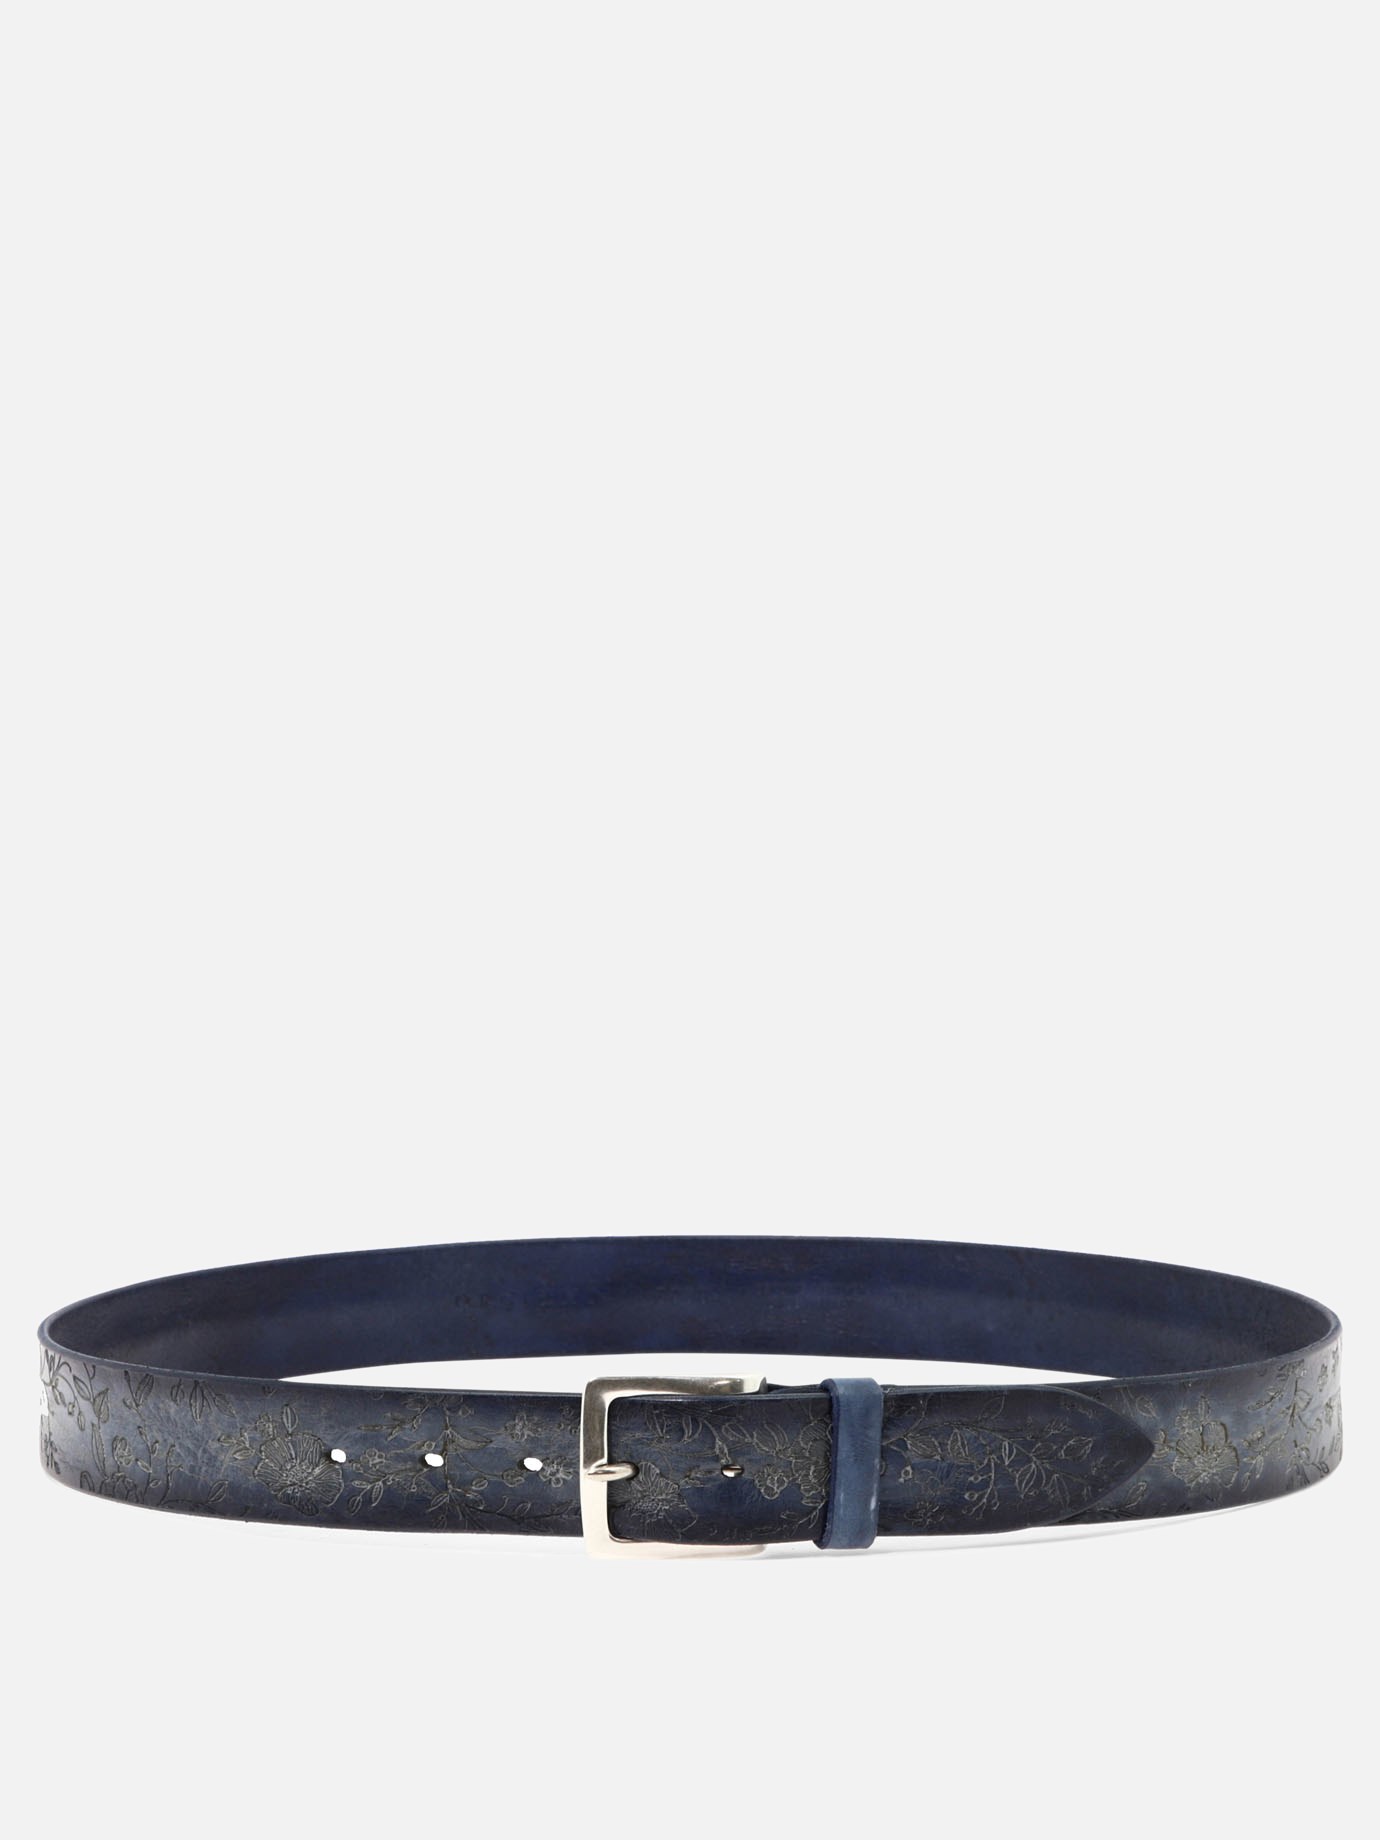  Stain Soapy  belt by Orciani